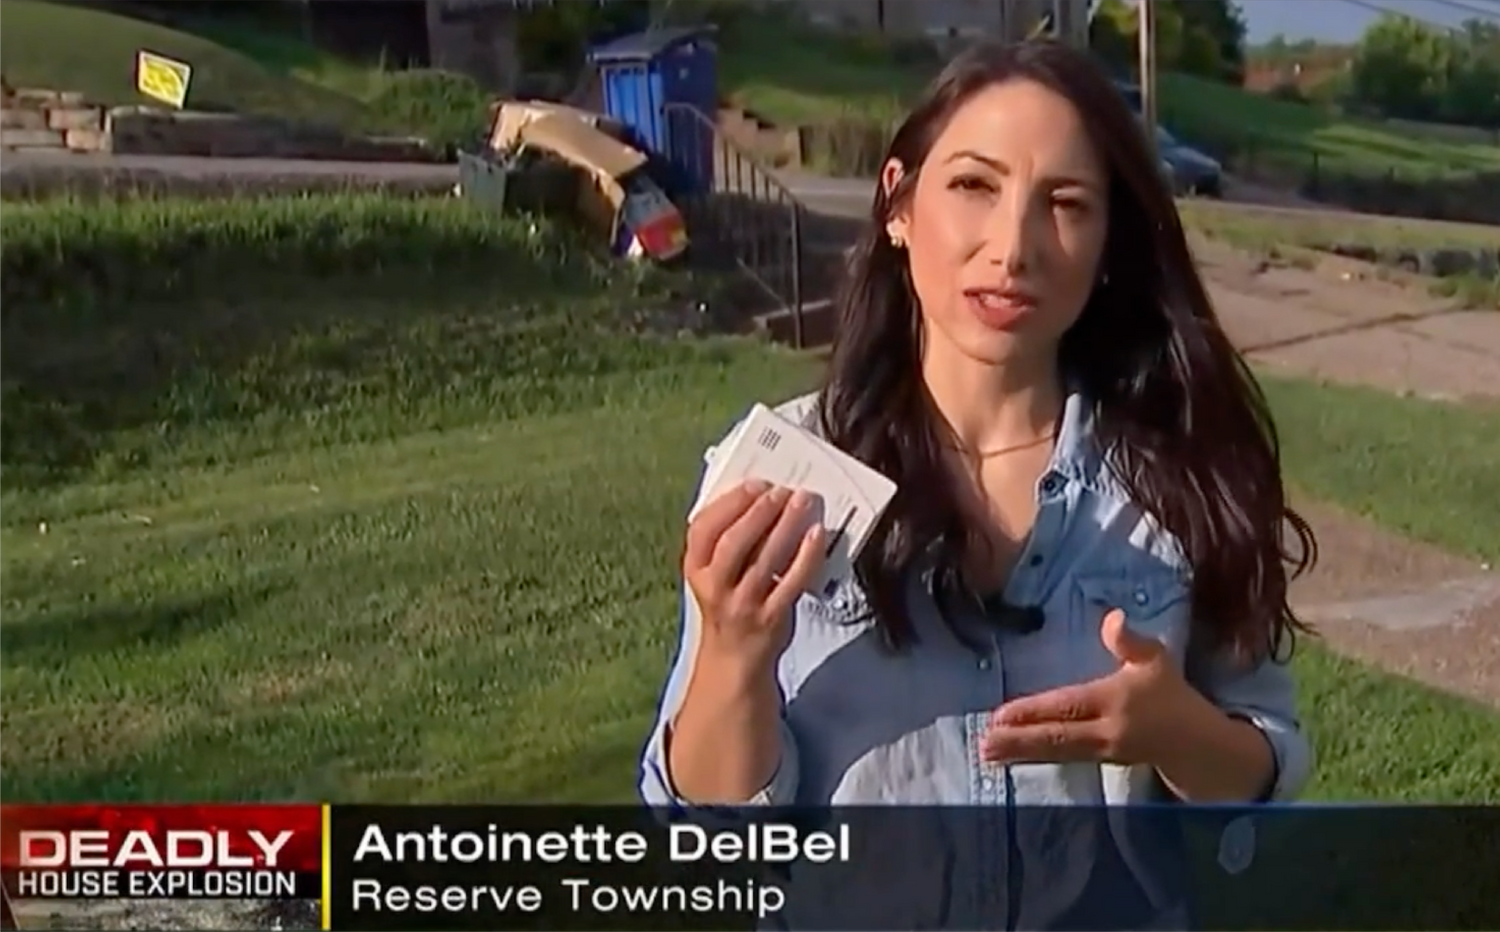 NBC WPXI News Highlights Natural Gas Safety with Our Alarms